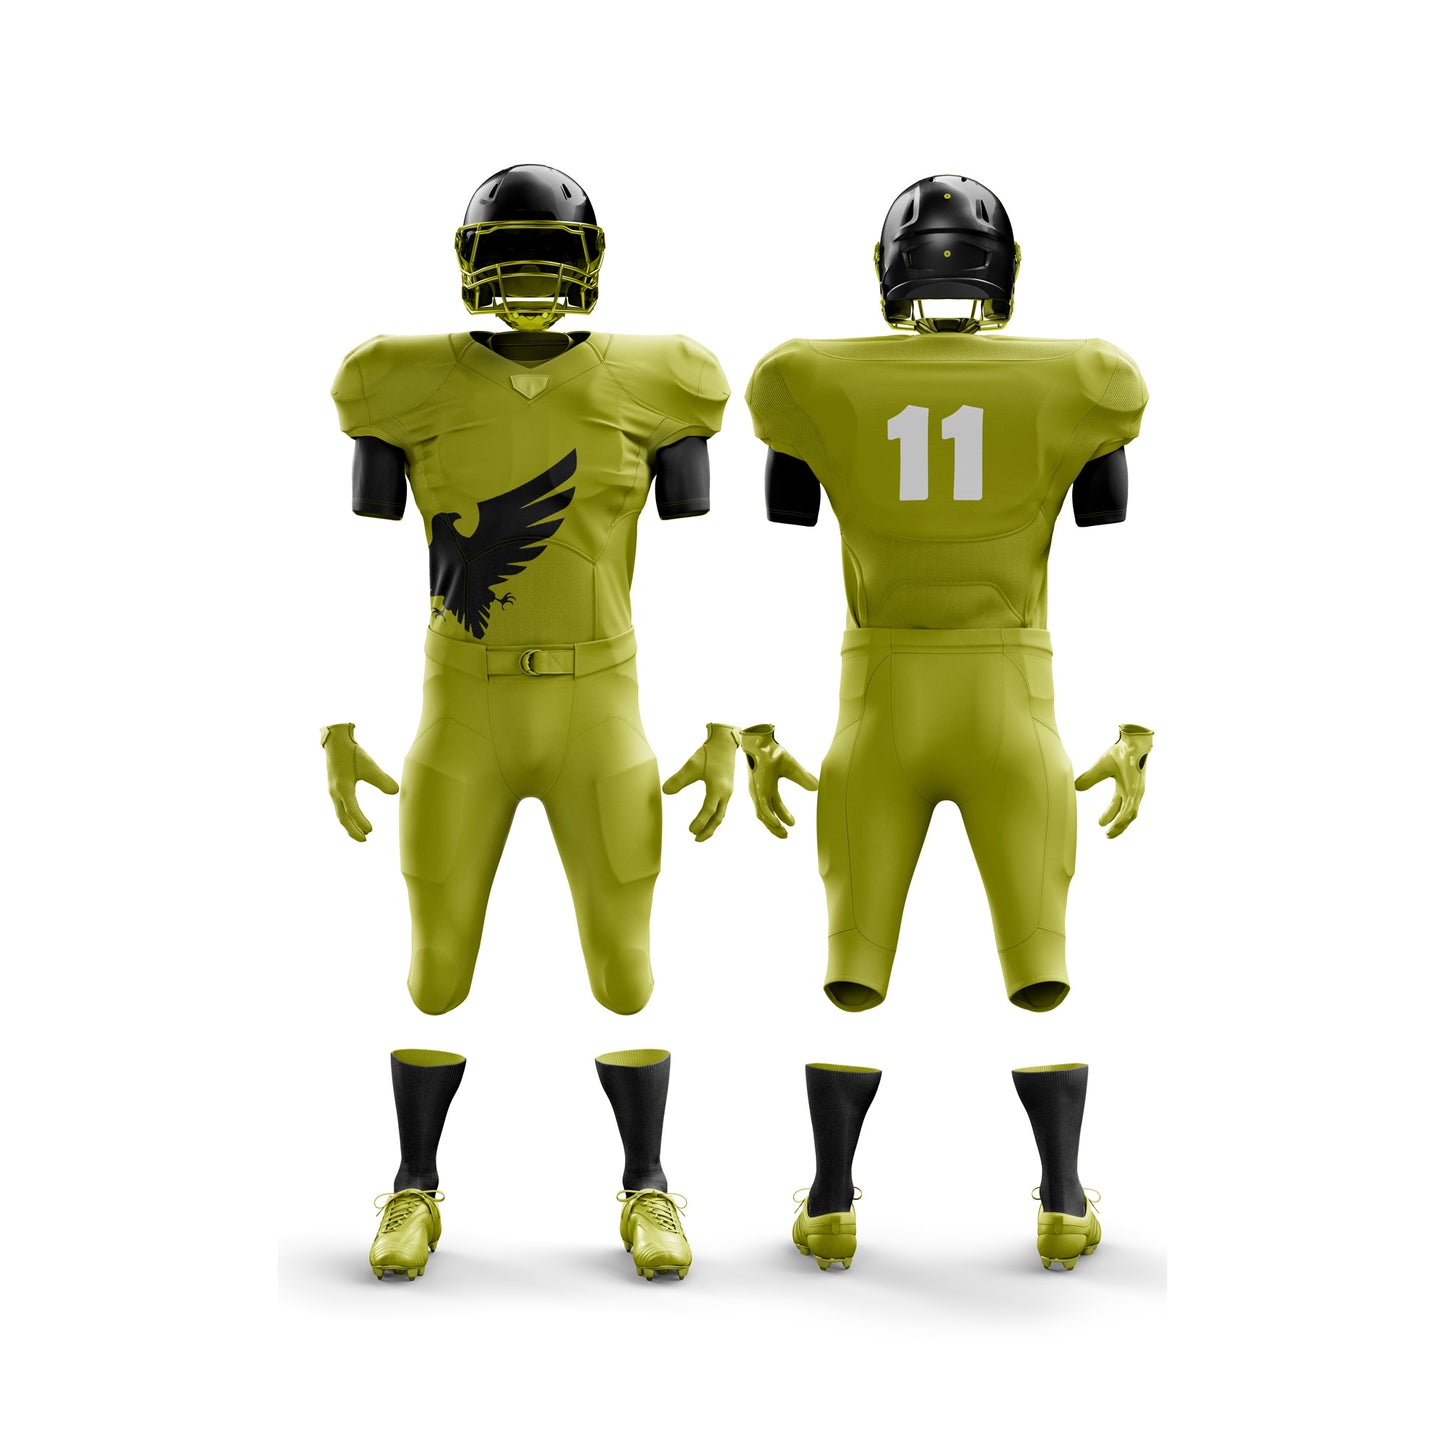 This file depicts the Uniform Xpert American Football Uniform, designed for elite performance on the football field. It features advanced moisture-wicking technology, reinforced seams, and a professional design. Ideal for athletes in the USA, UK, Canada, and globally, ensuring comfort and durability during competitive games and practices.